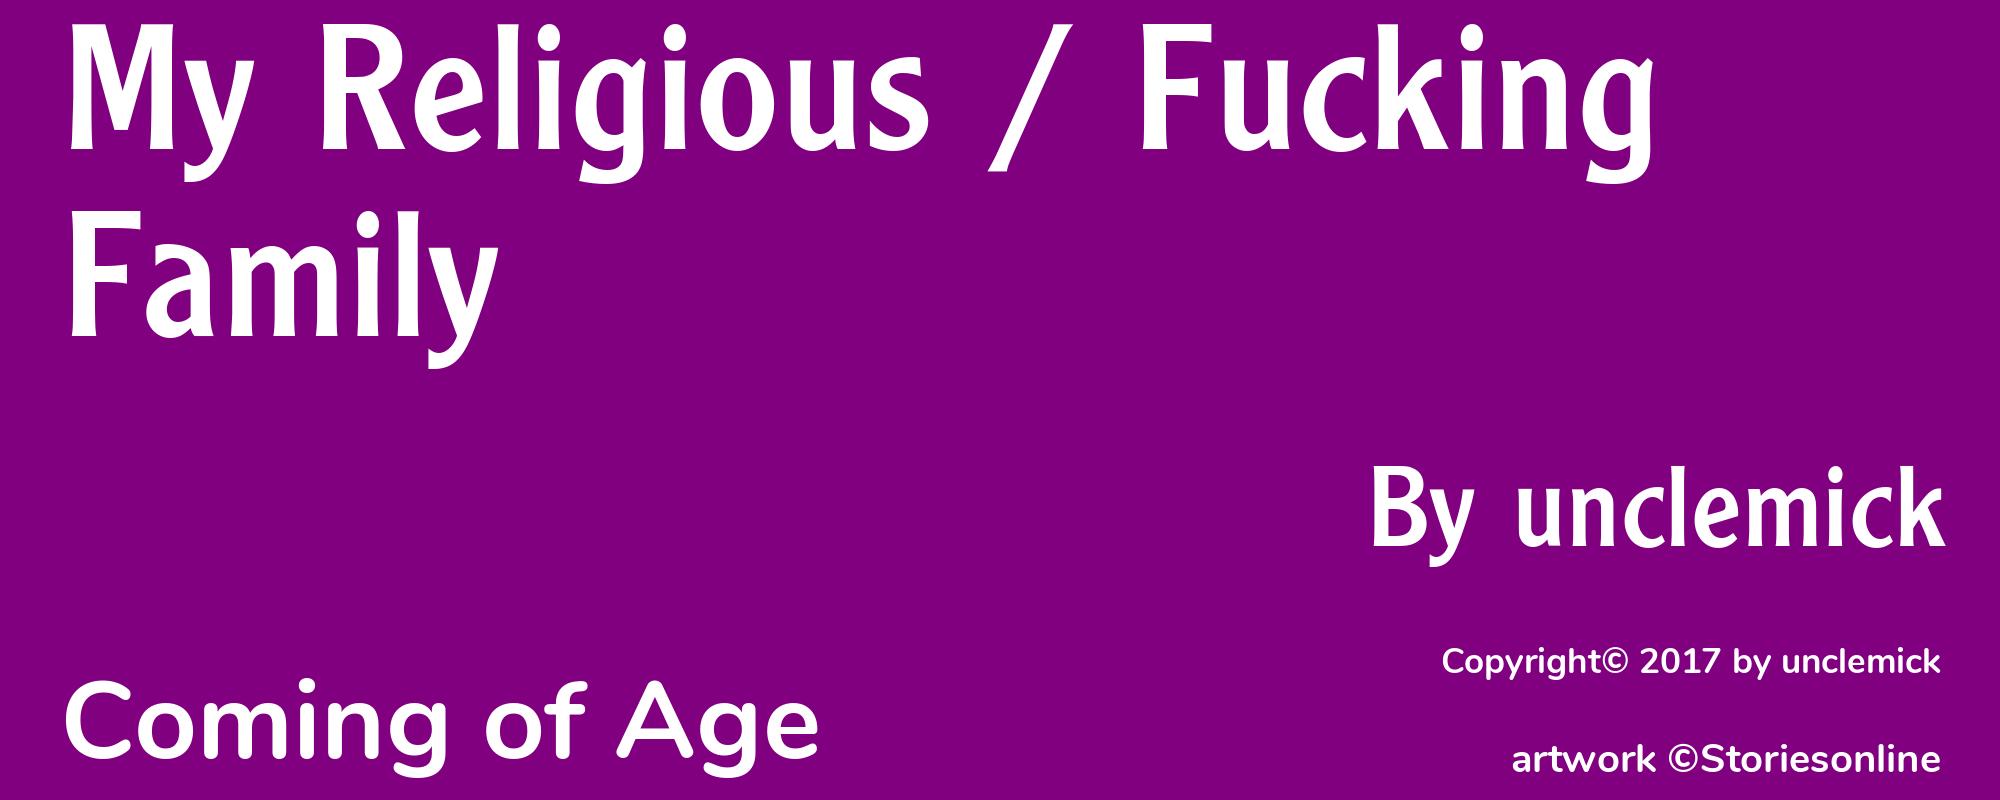 My Religious / Fucking Family - Cover